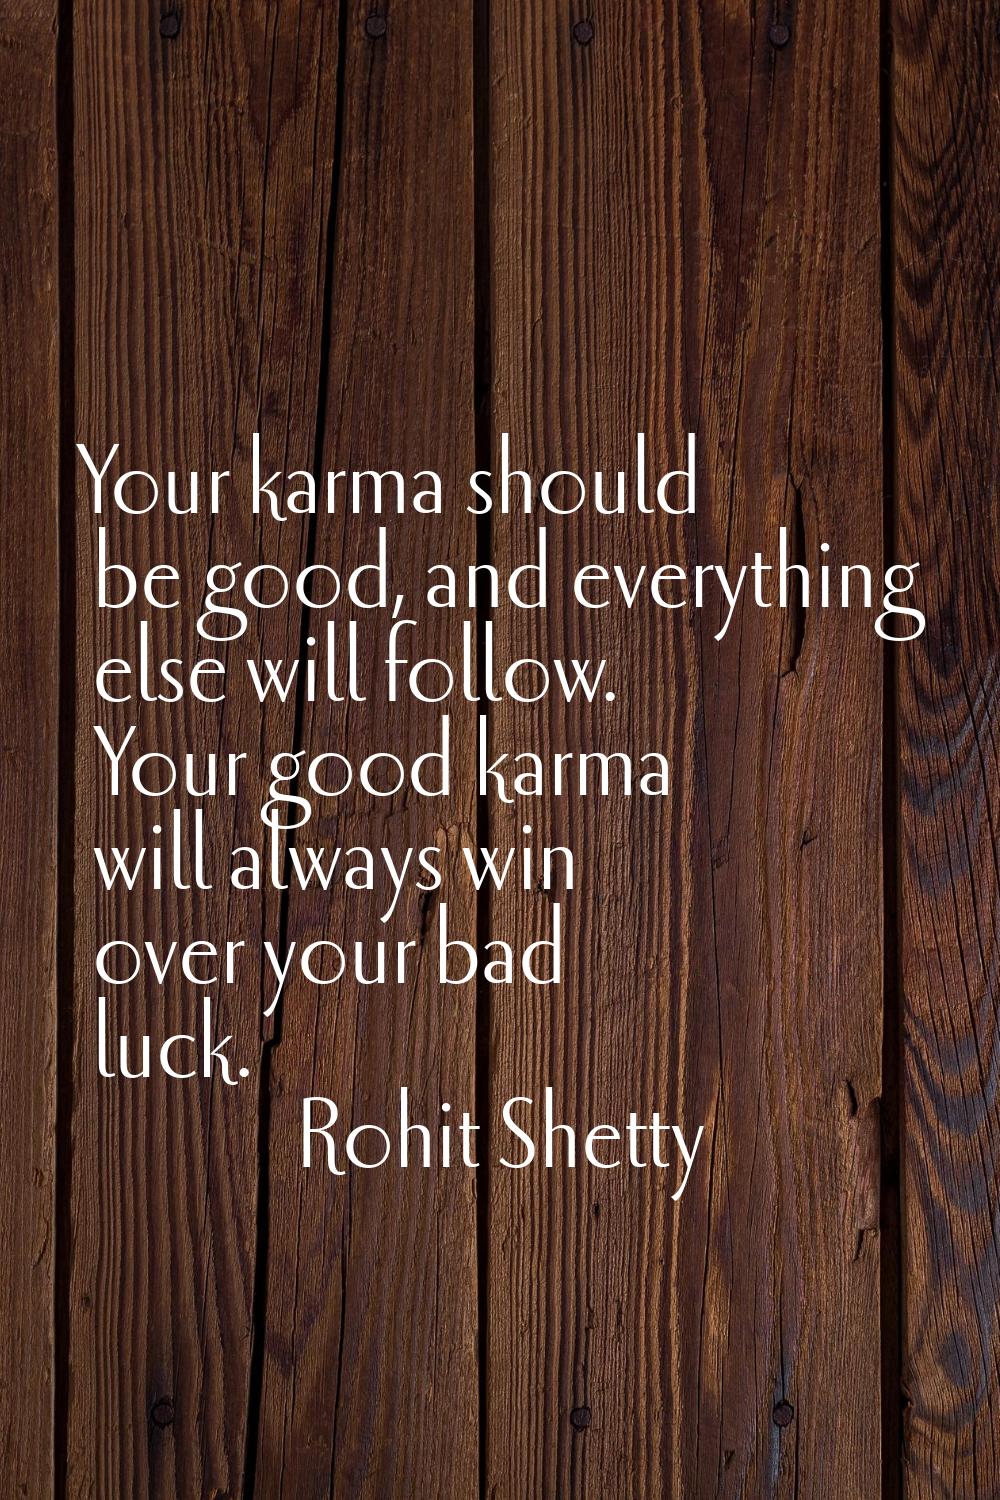 Your karma should be good, and everything else will follow. Your good karma will always win over yo